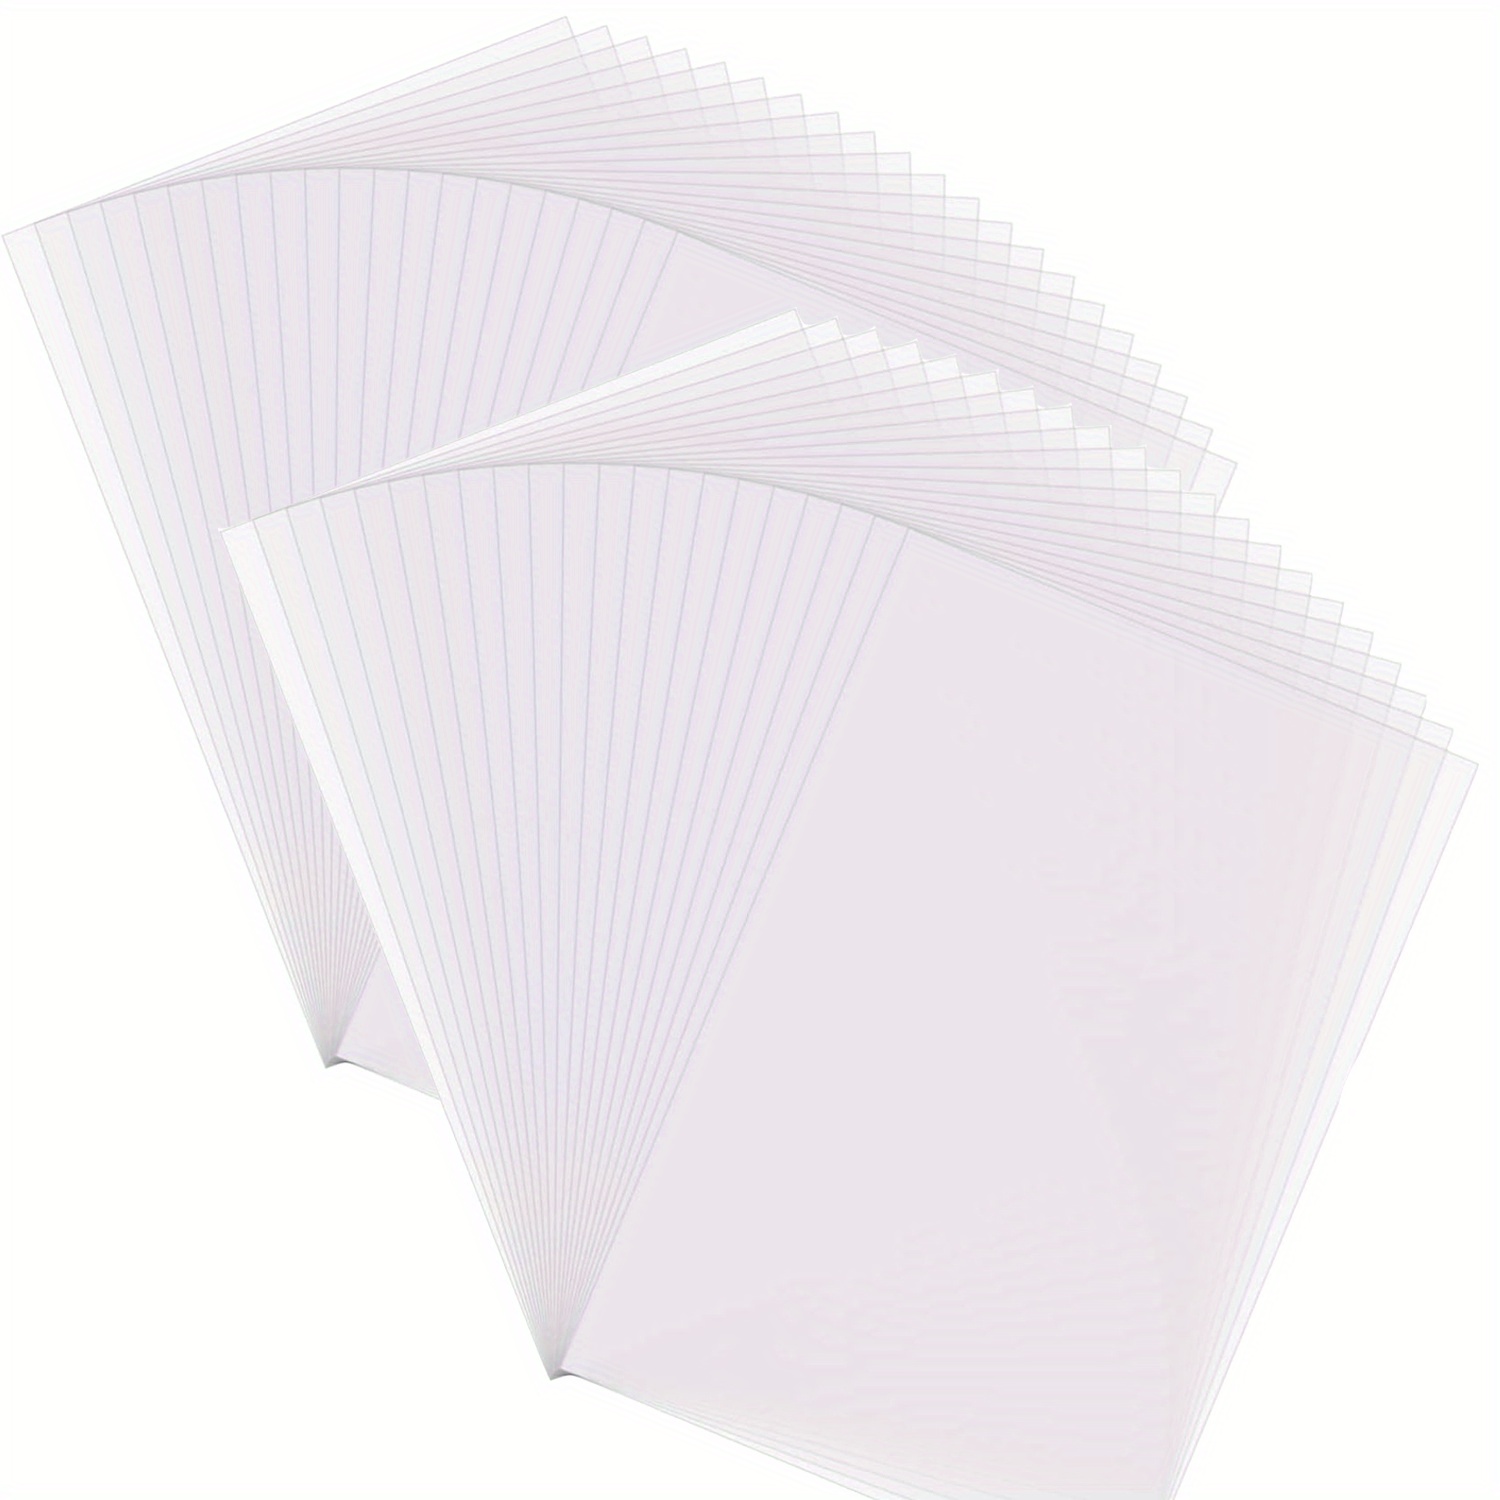 100 Sheets Tracing Paper, 8.27 X 11.69 Inches Artists Tracing Paper Pad  White Trace Paper Translucent Clear Paper For Sketching Tracing Drawing  Animat